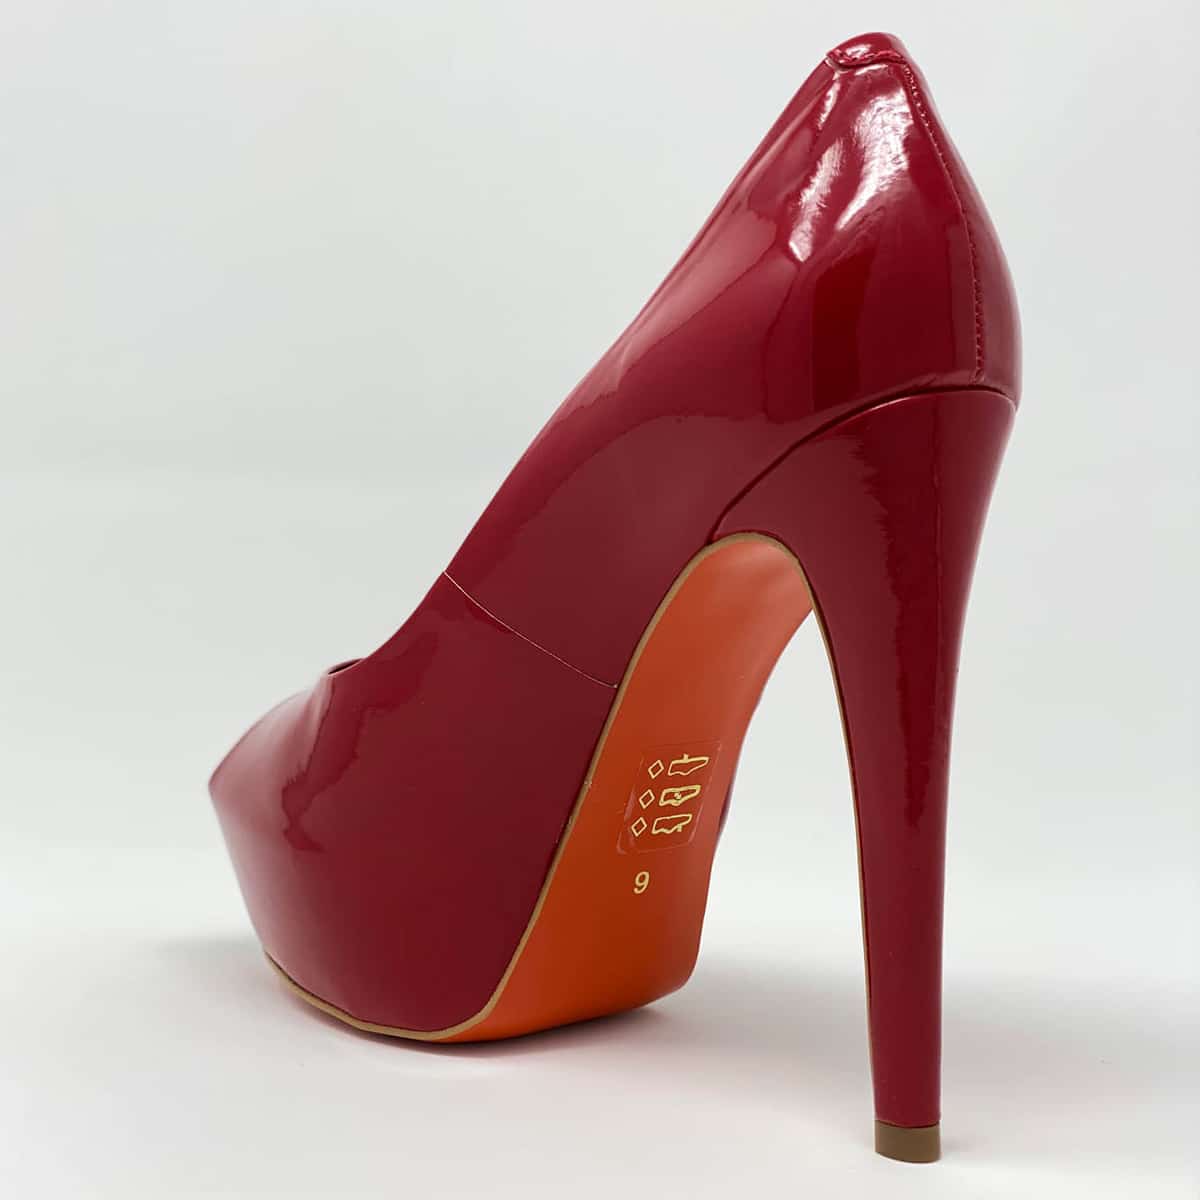 red patent leather peep toe pumps